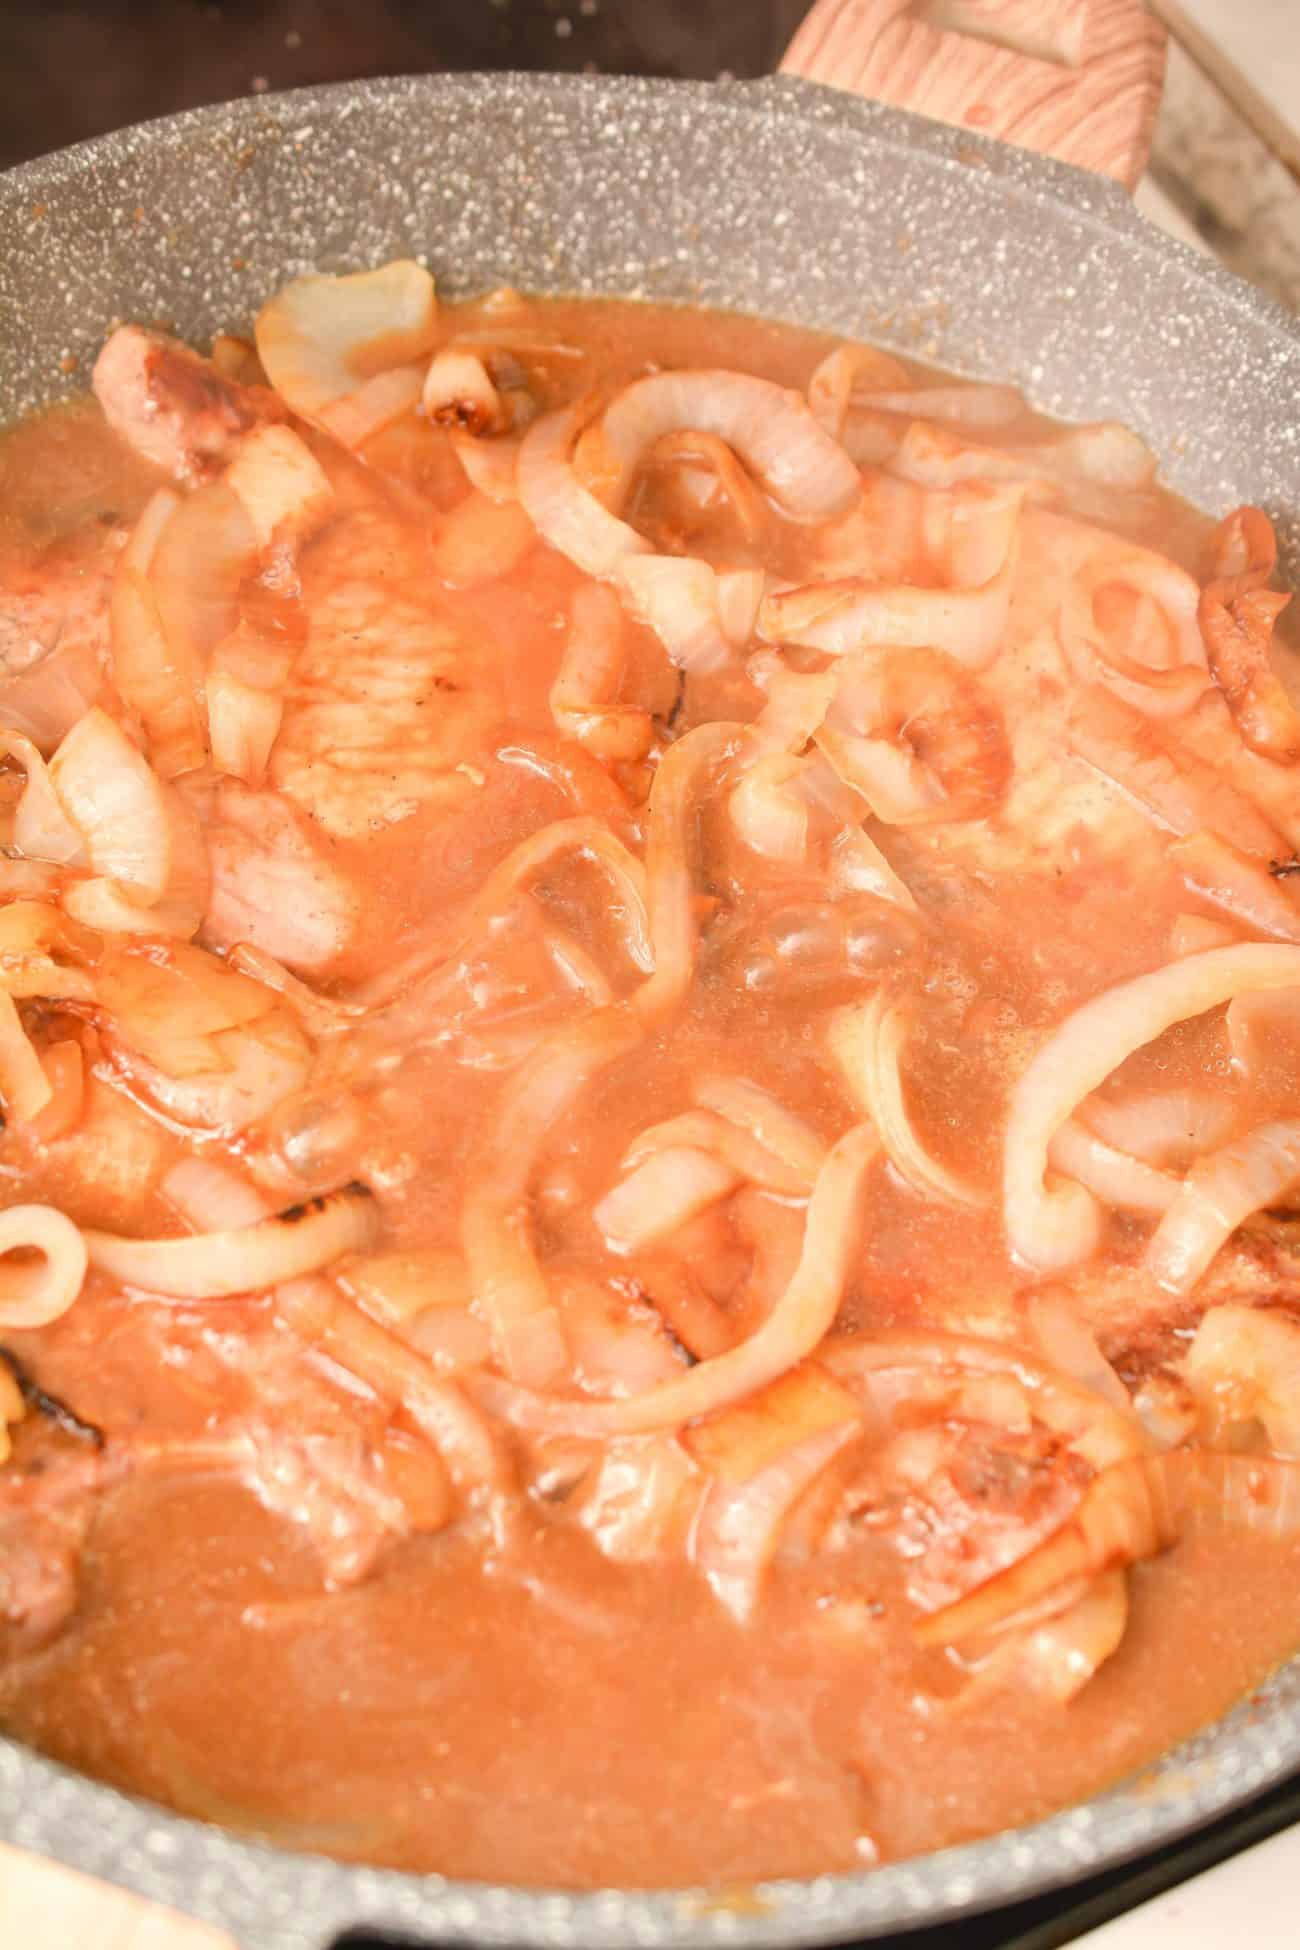 Add the pork chops and onions to the gravy in the skillet, and saute over medium-low heat covered for 15-20 minutes.